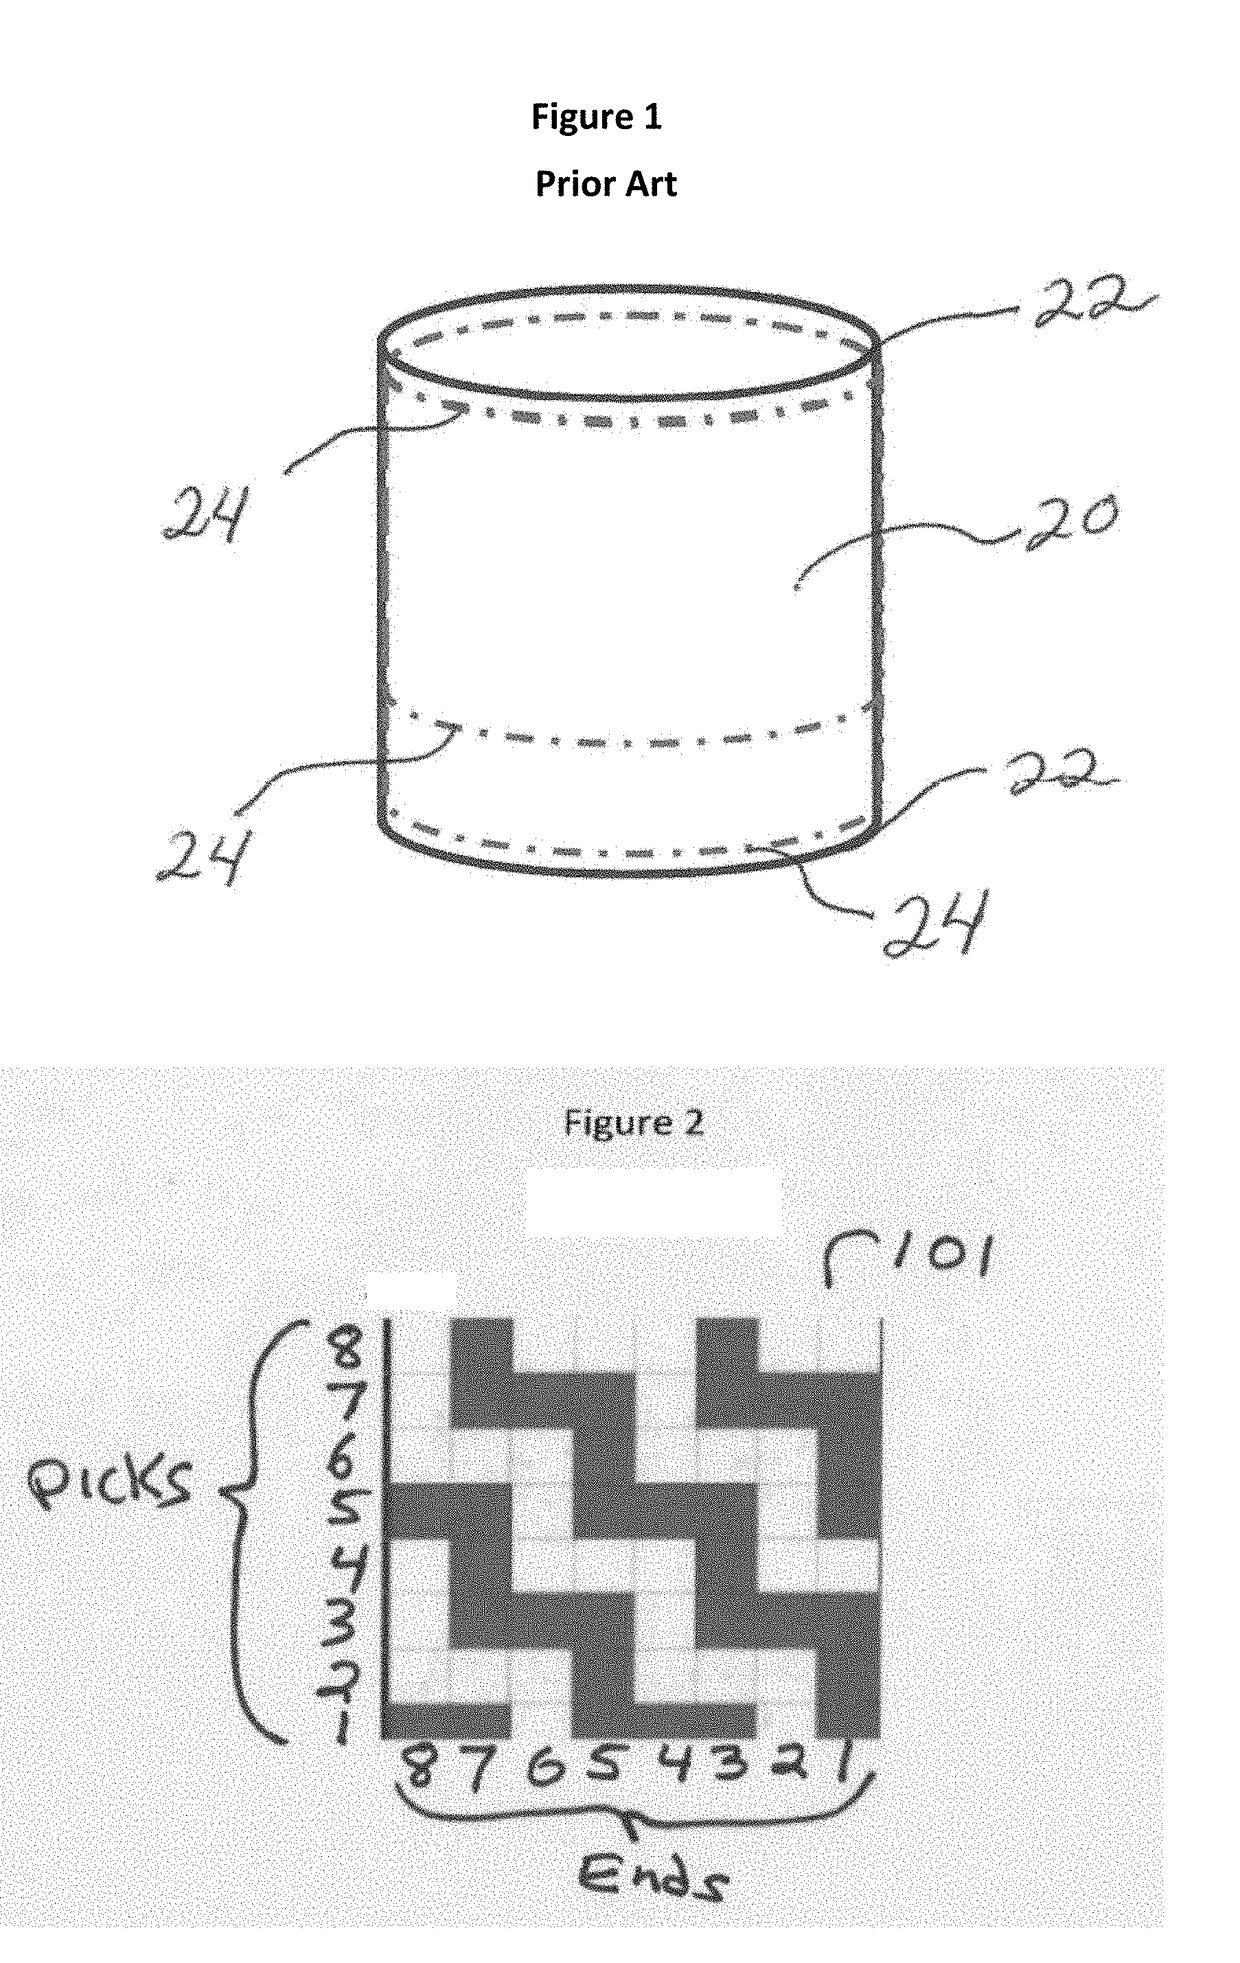 Integrally woven or knitted textile with pouch and methods of making the same